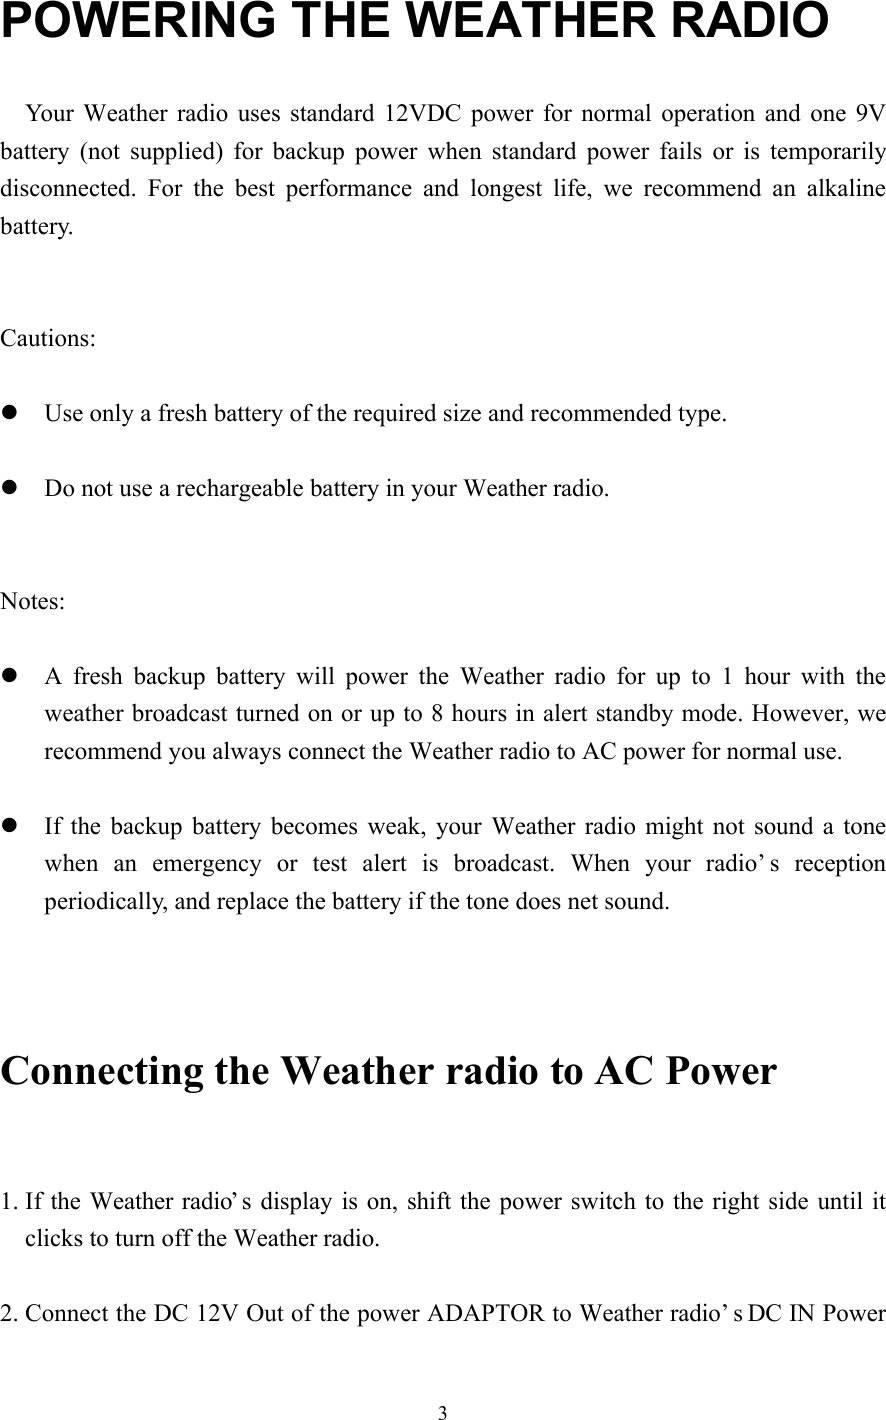 3POWERING THE WEATHER RADIO  Your Weather radio uses standard 12VDC power for normal operation and one 9Vbattery (not supplied) for backup power when standard power fails or is temporarilydisconnected. For the best performance and longest life, we recommend an alkalinebattery.Cautions:l Use only a fresh battery of the required size and recommended type.l Do not use a rechargeable battery in your Weather radio.Notes:l A  fresh backup battery will power the Weather radio for up to 1 hour with theweather broadcast turned on or up to 8 hours in alert standby mode. However, werecommend you always connect the Weather radio to AC power for normal use.   l If the backup battery becomes weak, your Weather radio might not sound a tonewhen an emergency or test alert is broadcast. When your radio’s receptionperiodically, and replace the battery if the tone does net sound.Connecting the Weather radio to AC Power1. If the Weather radio’s display is on, shift the power switch to the right side until itclicks to turn off the Weather radio.2. Connect the DC 12V Out of the power ADAPTOR to Weather radio’s DC IN Power